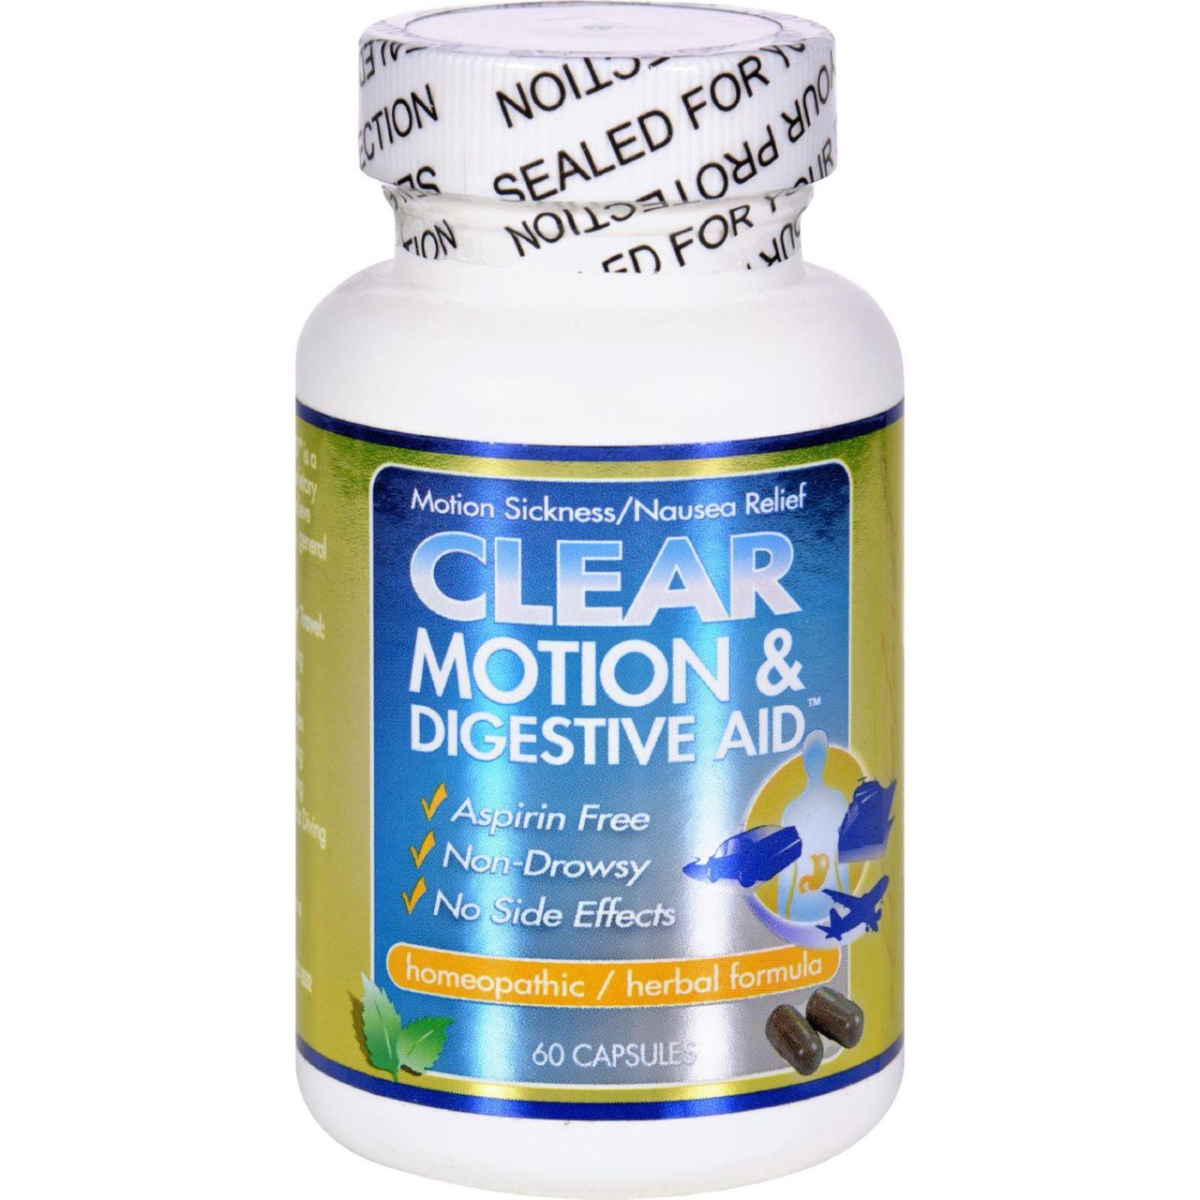 Hg0408872 Clear Motion & Digestive Aid - 60 Capsules